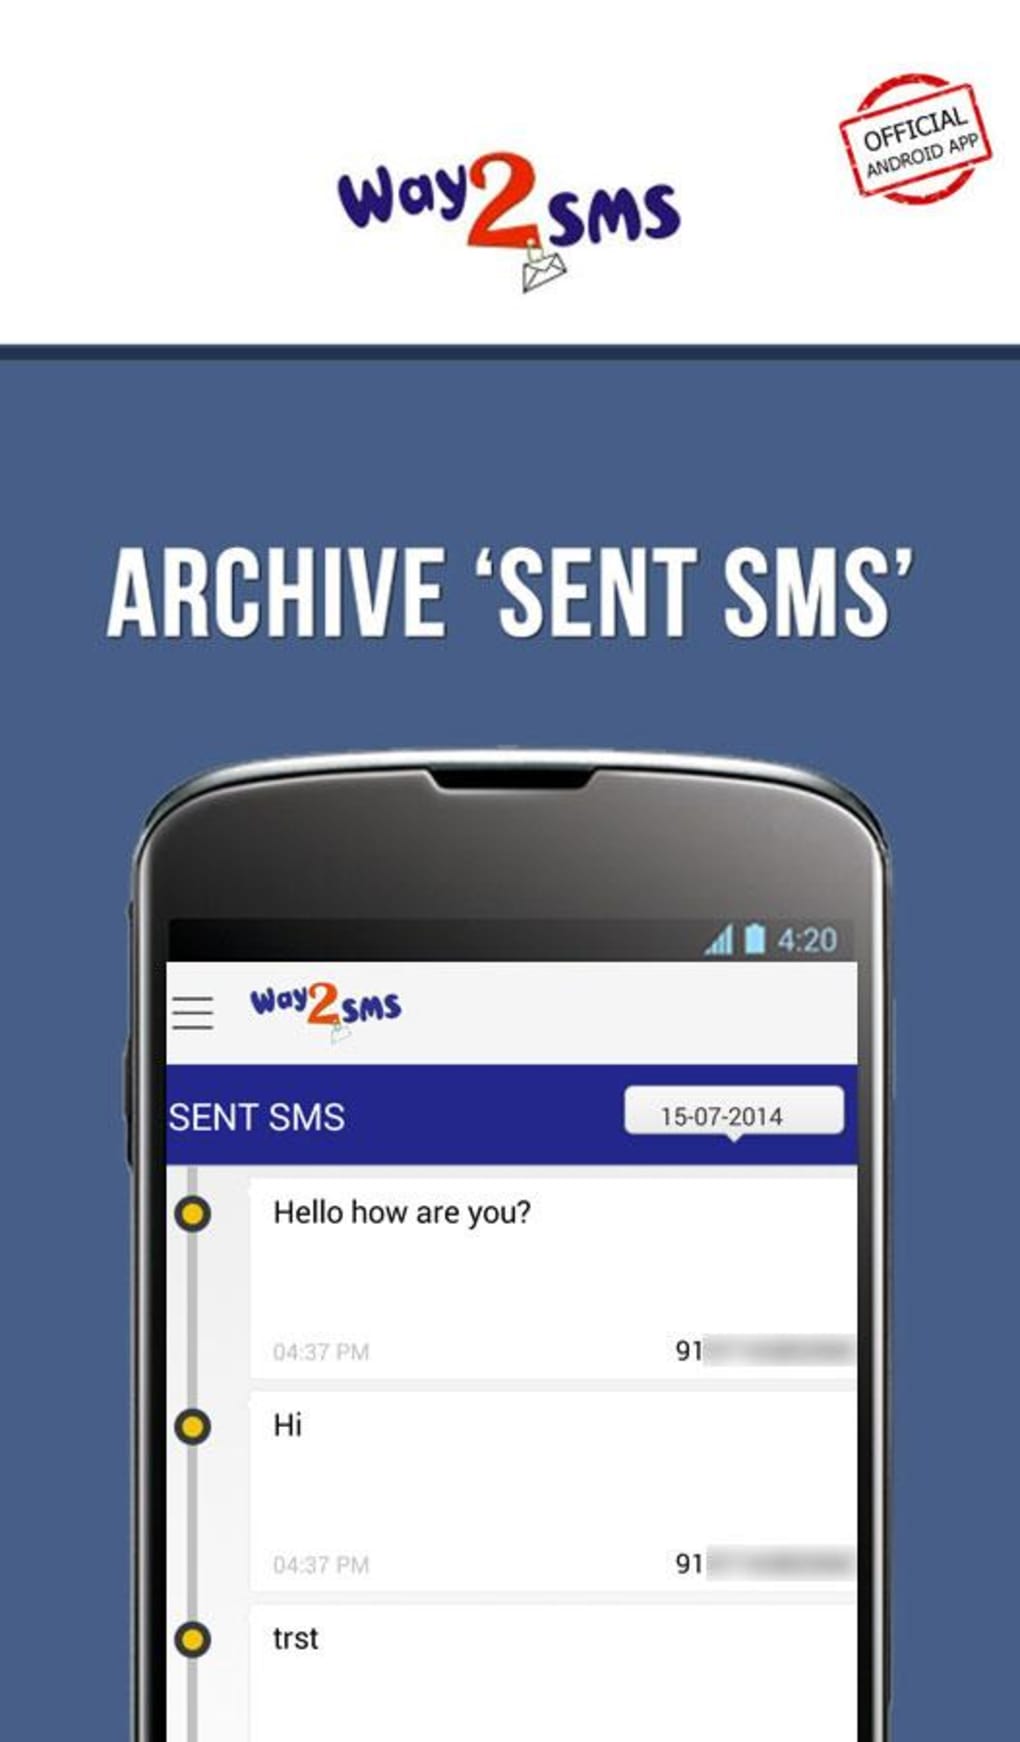 Way2sms sms application